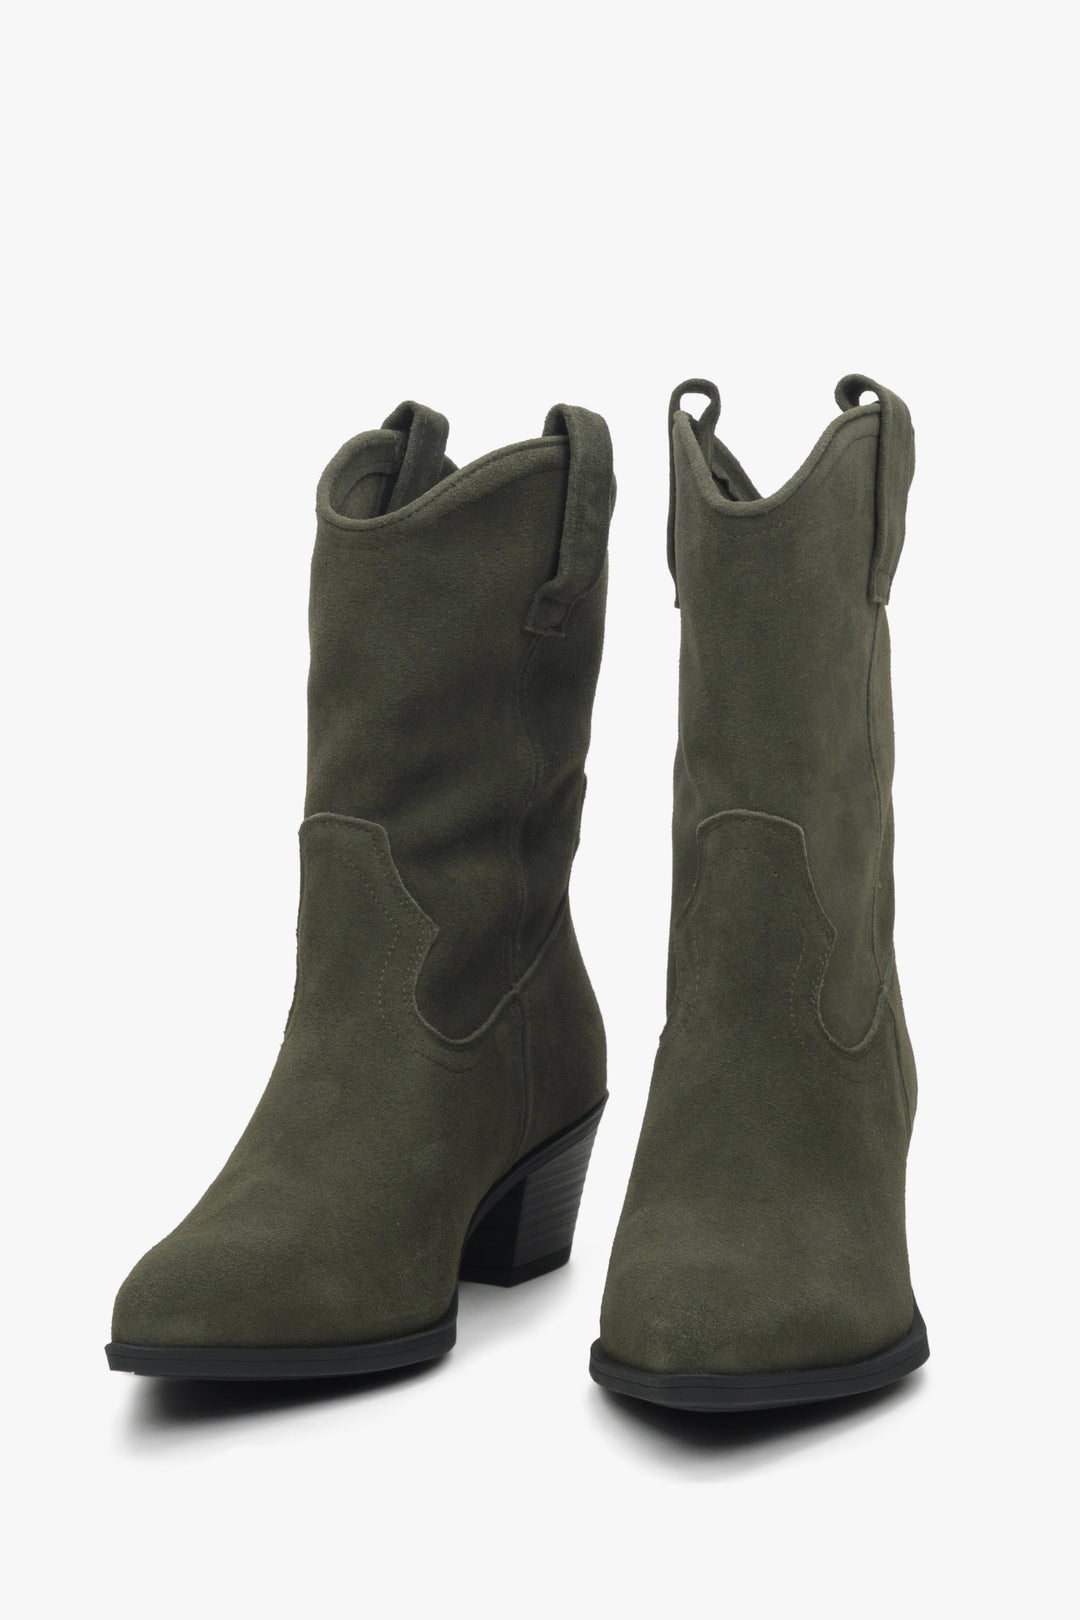 Women's Cowboy green low-cut boots by Estro - perfect for spring.